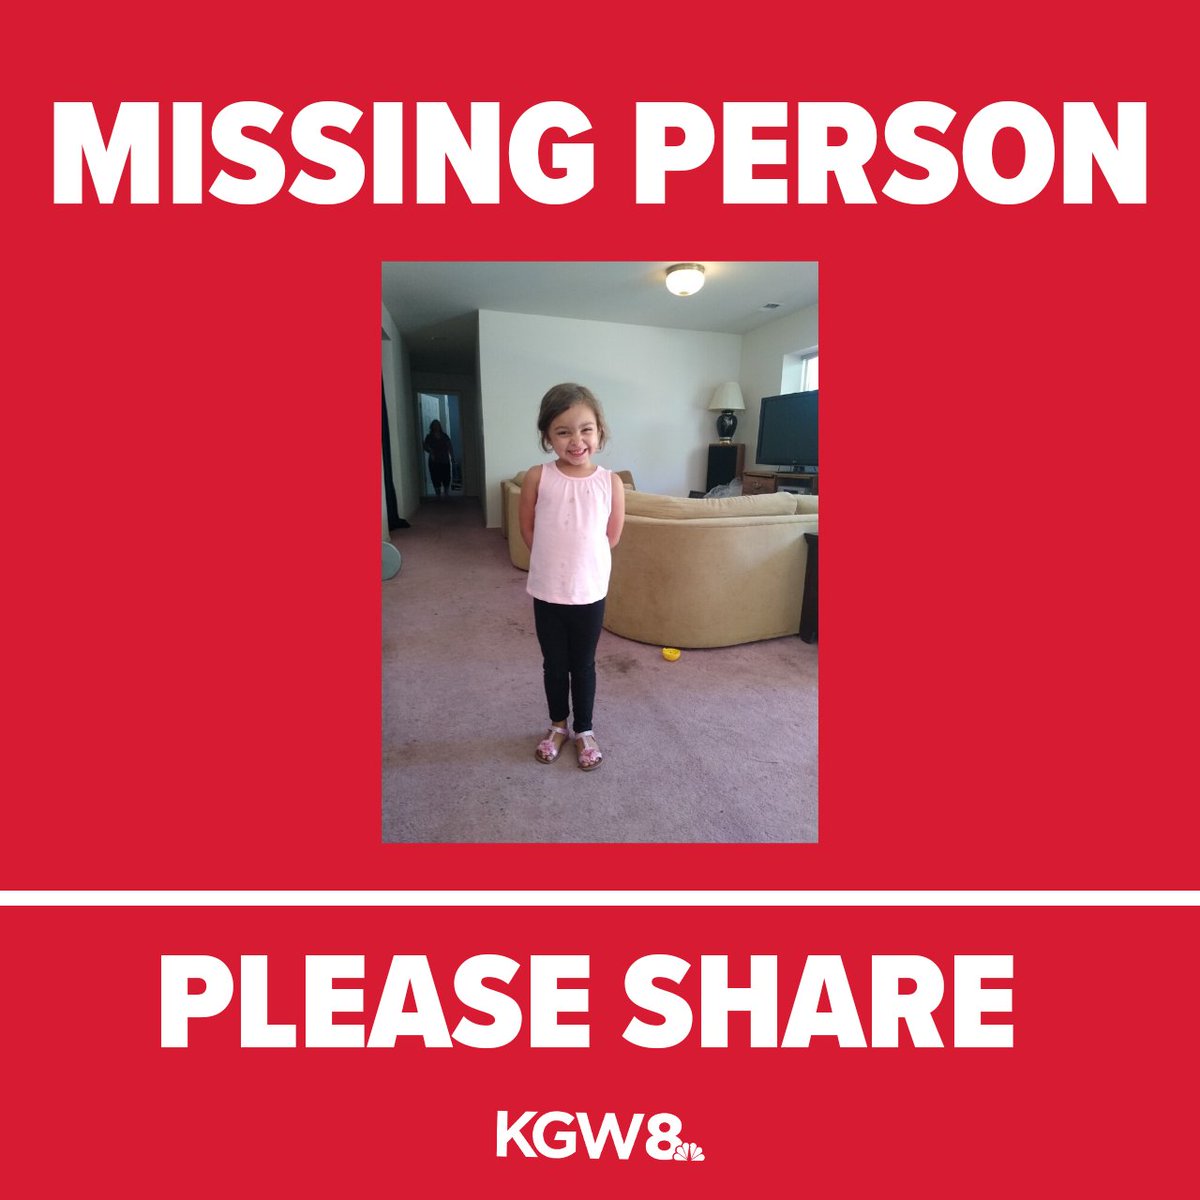 SPREAD THE WORD: Police are searching for 4-year-old Anna Devoll. She was last seen near Angela Way in Milwaukie at around 5 p.m. She is about 3’9” and 38 pounds. Anna has shoulder length brown hair and brown eyes. Call Milwaukie police at 503-786-7500 if you see her.